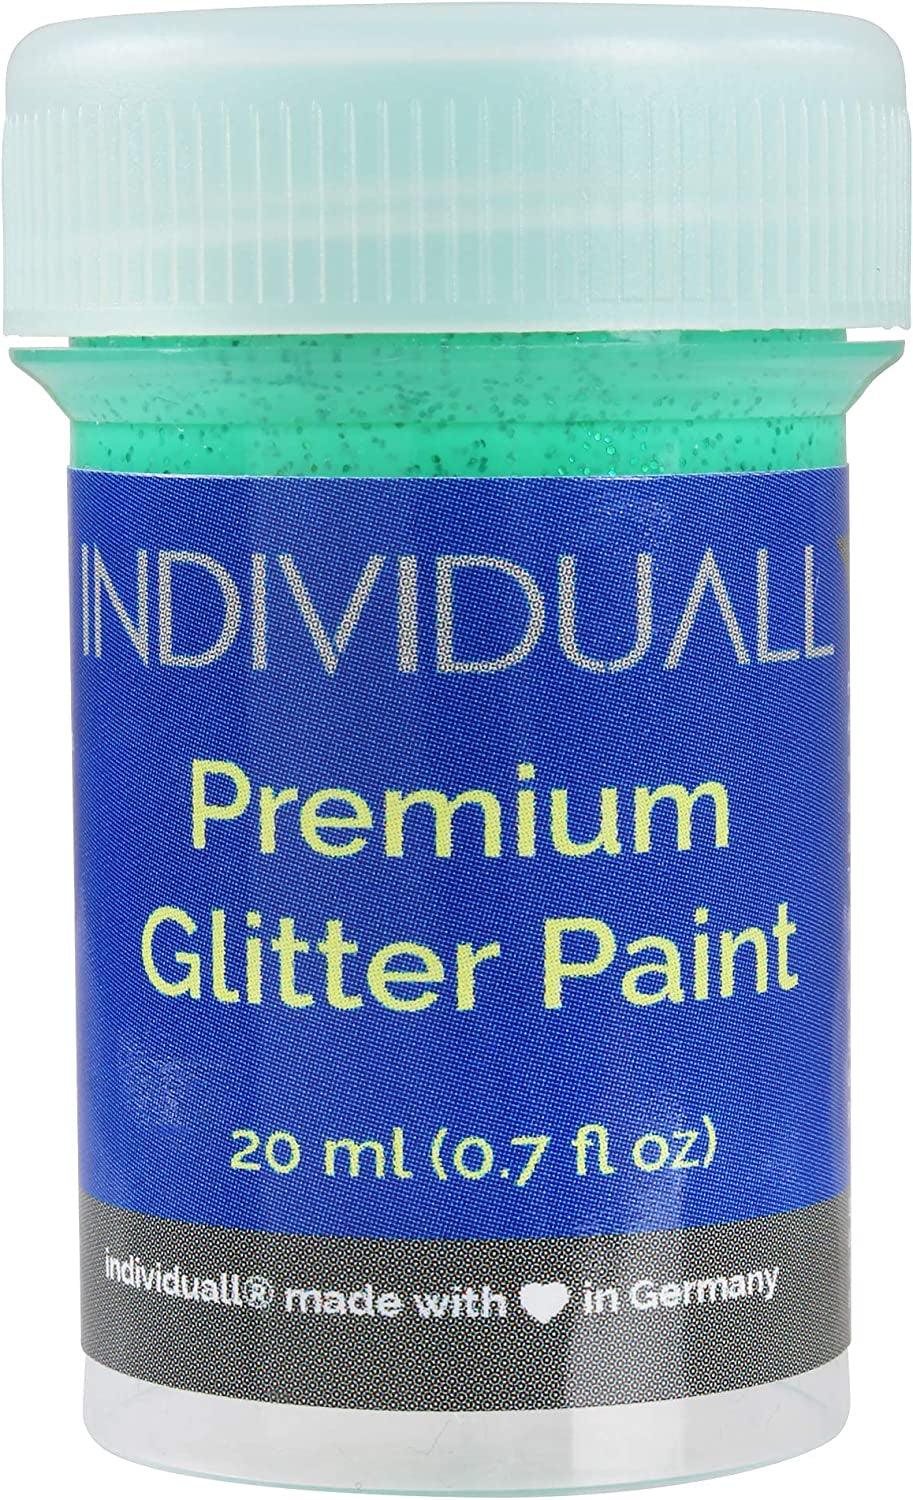 Glitter Paint Set of 8 Sparkly, 20Ml Acrylic Paints with Metallic